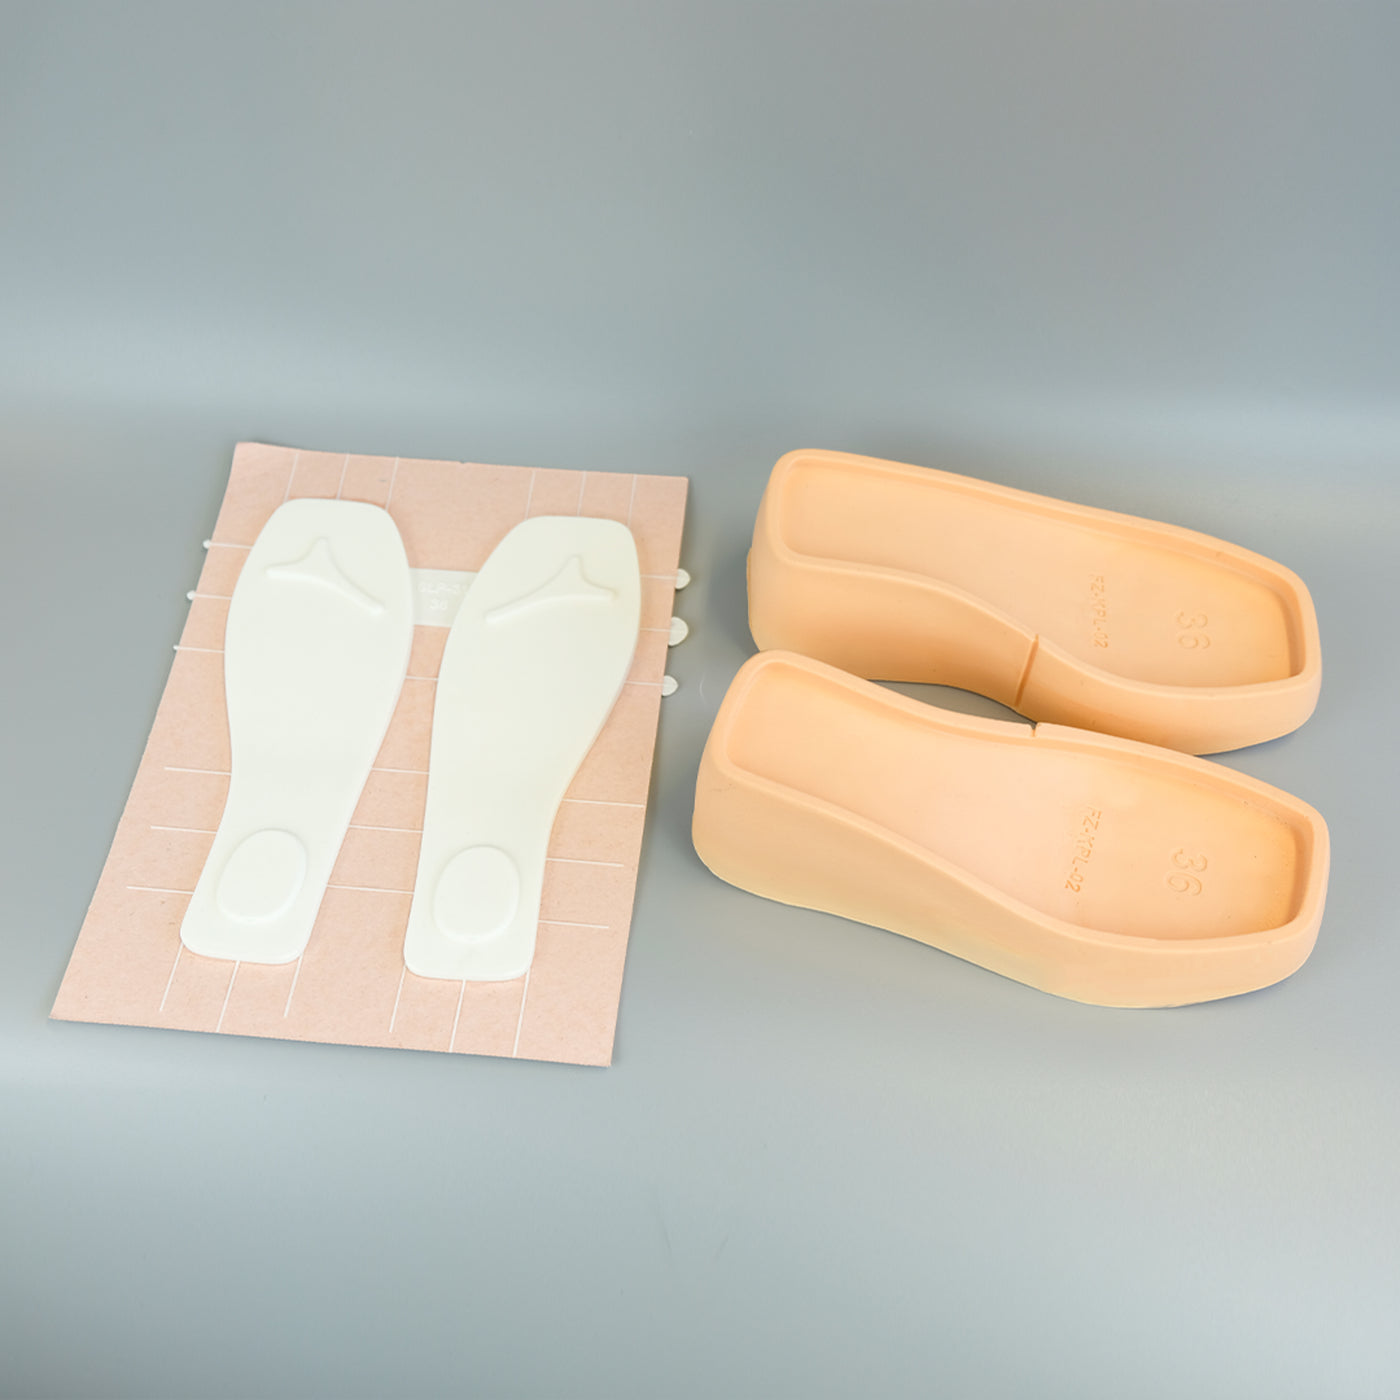 I Can Make Shoes Square toe wedge for DIY Sandal making